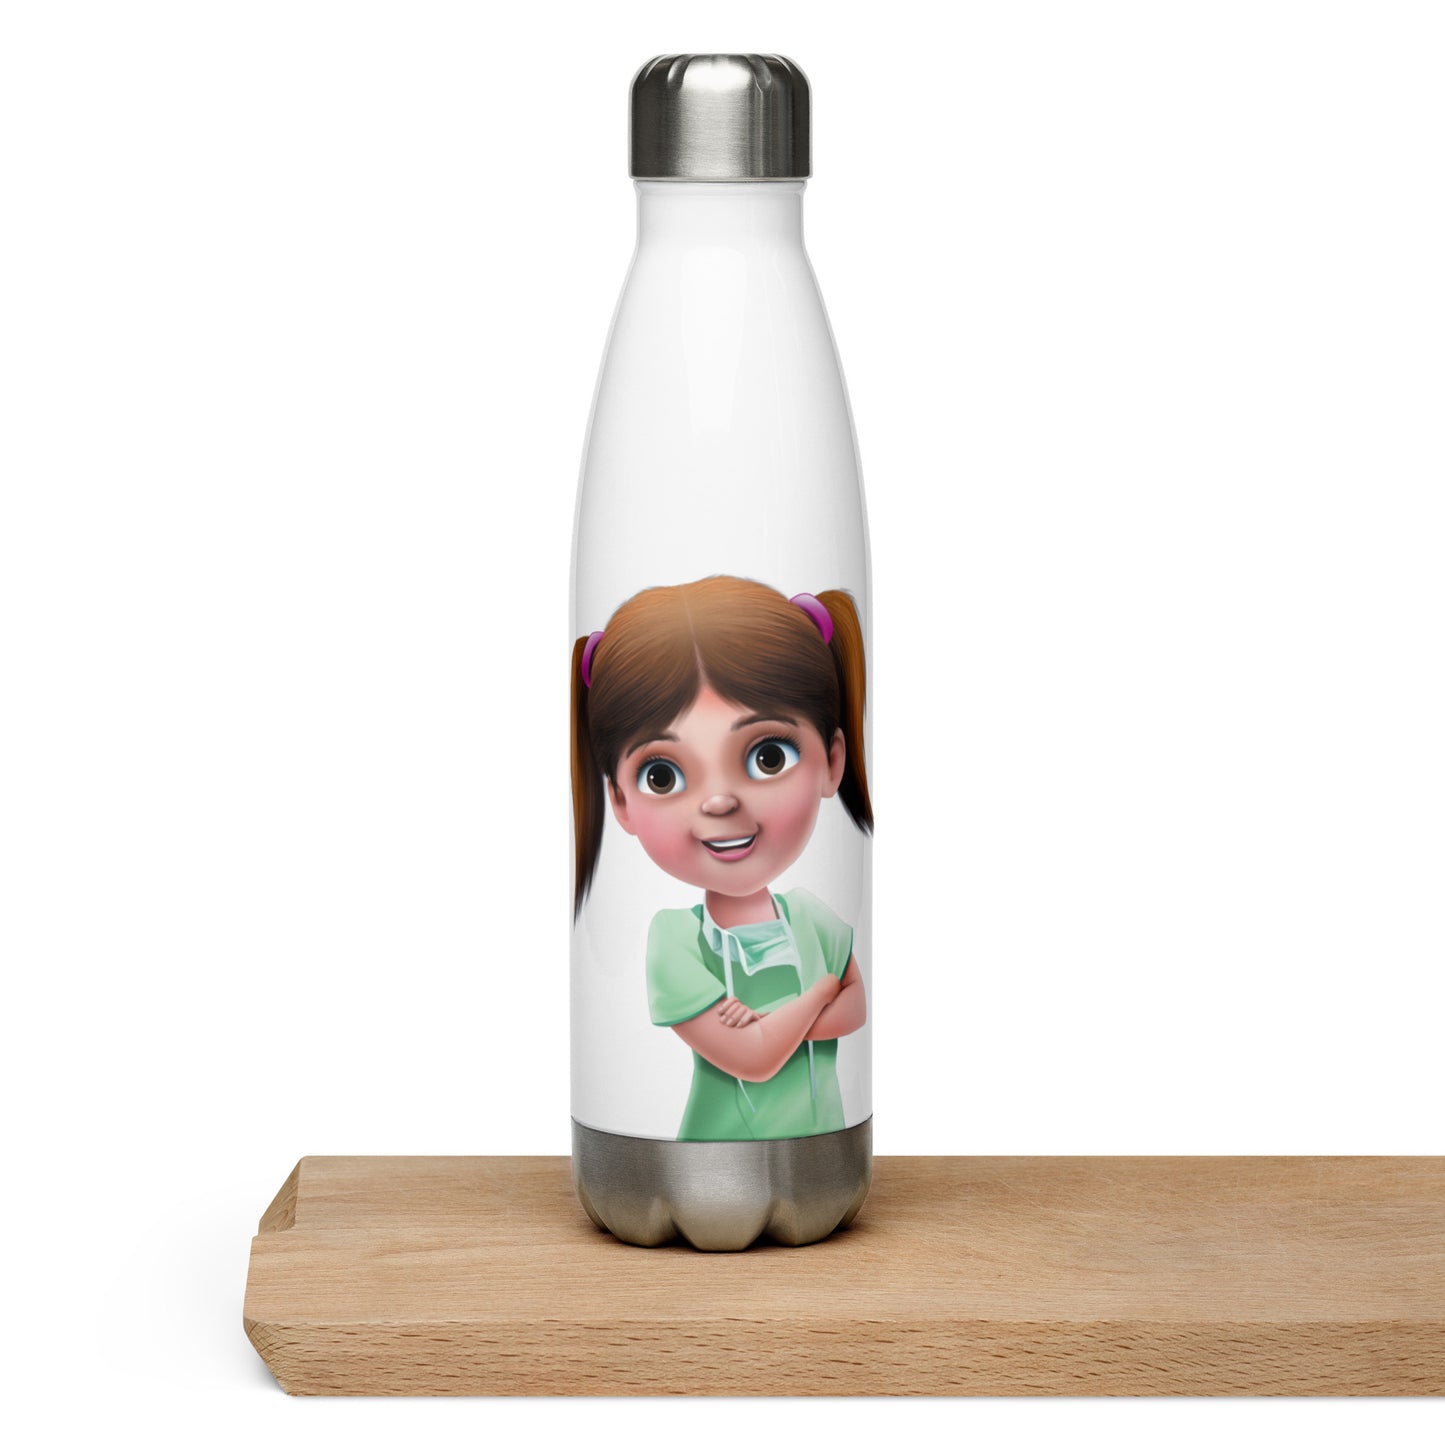 When I'm a Surgeon Stainless Steel Water Bottle